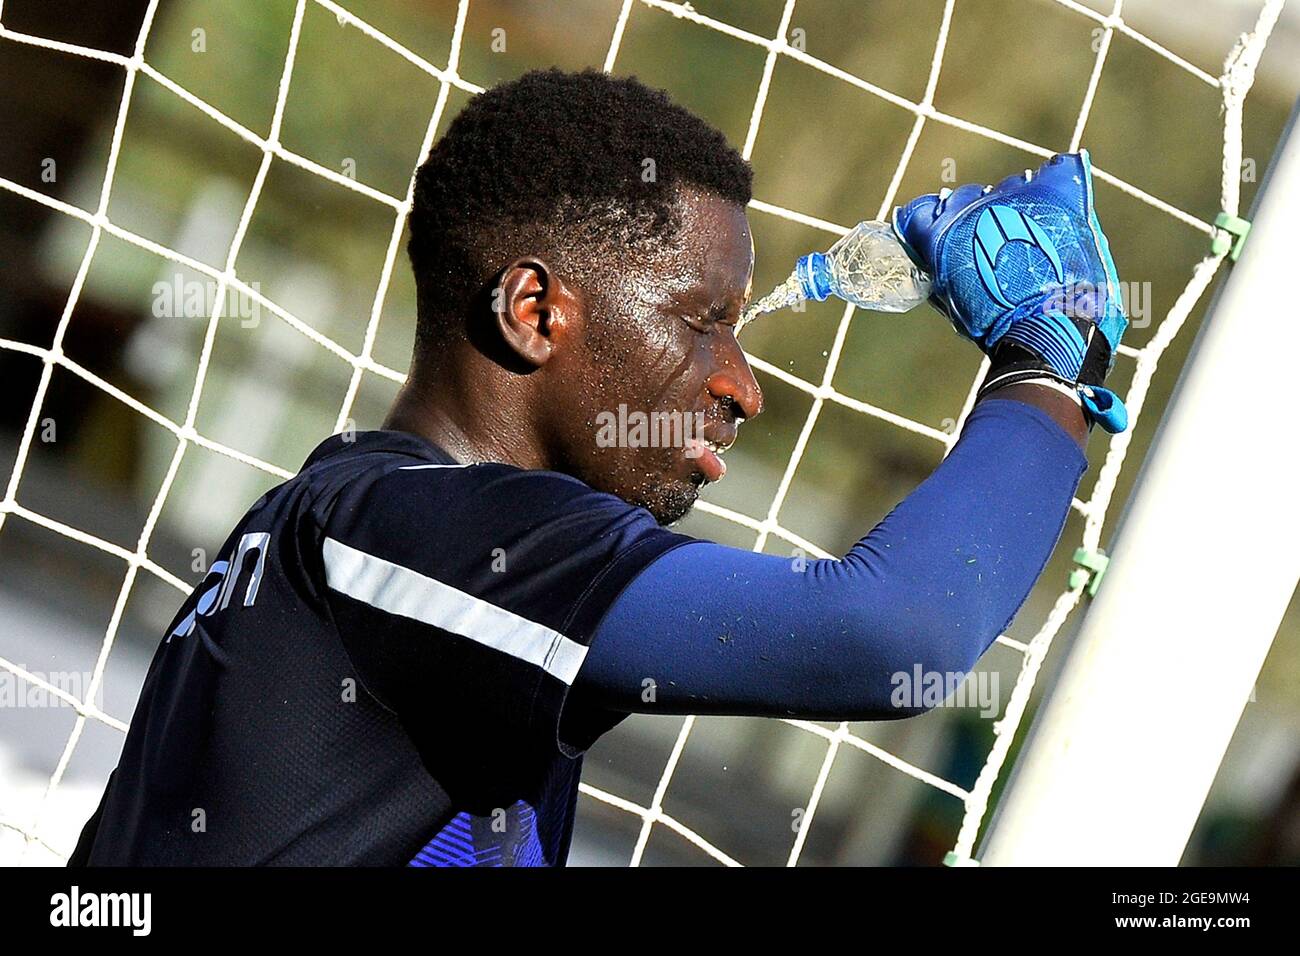 Demba Thiam Spal player, during the Italian Cup match rta Benevento vs Spal final result 2-1, match played at the Ciro Vigorito stadium in Benevento. Stock Photo